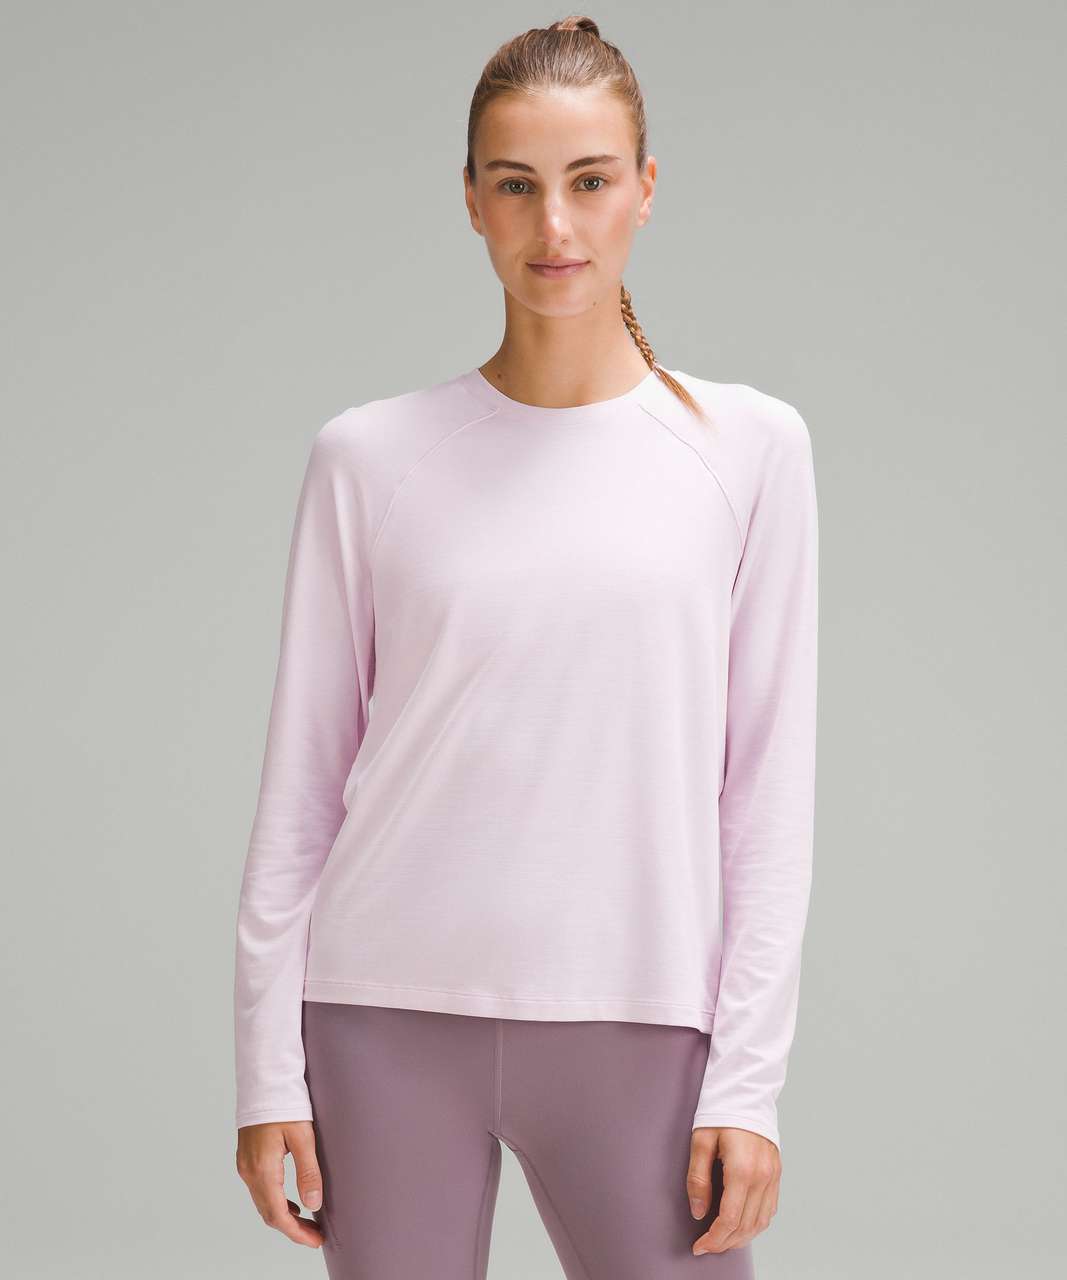 Lululemon License to Train Classic-Fit Long-Sleeve Shirt - Heathered Meadowsweet Pink